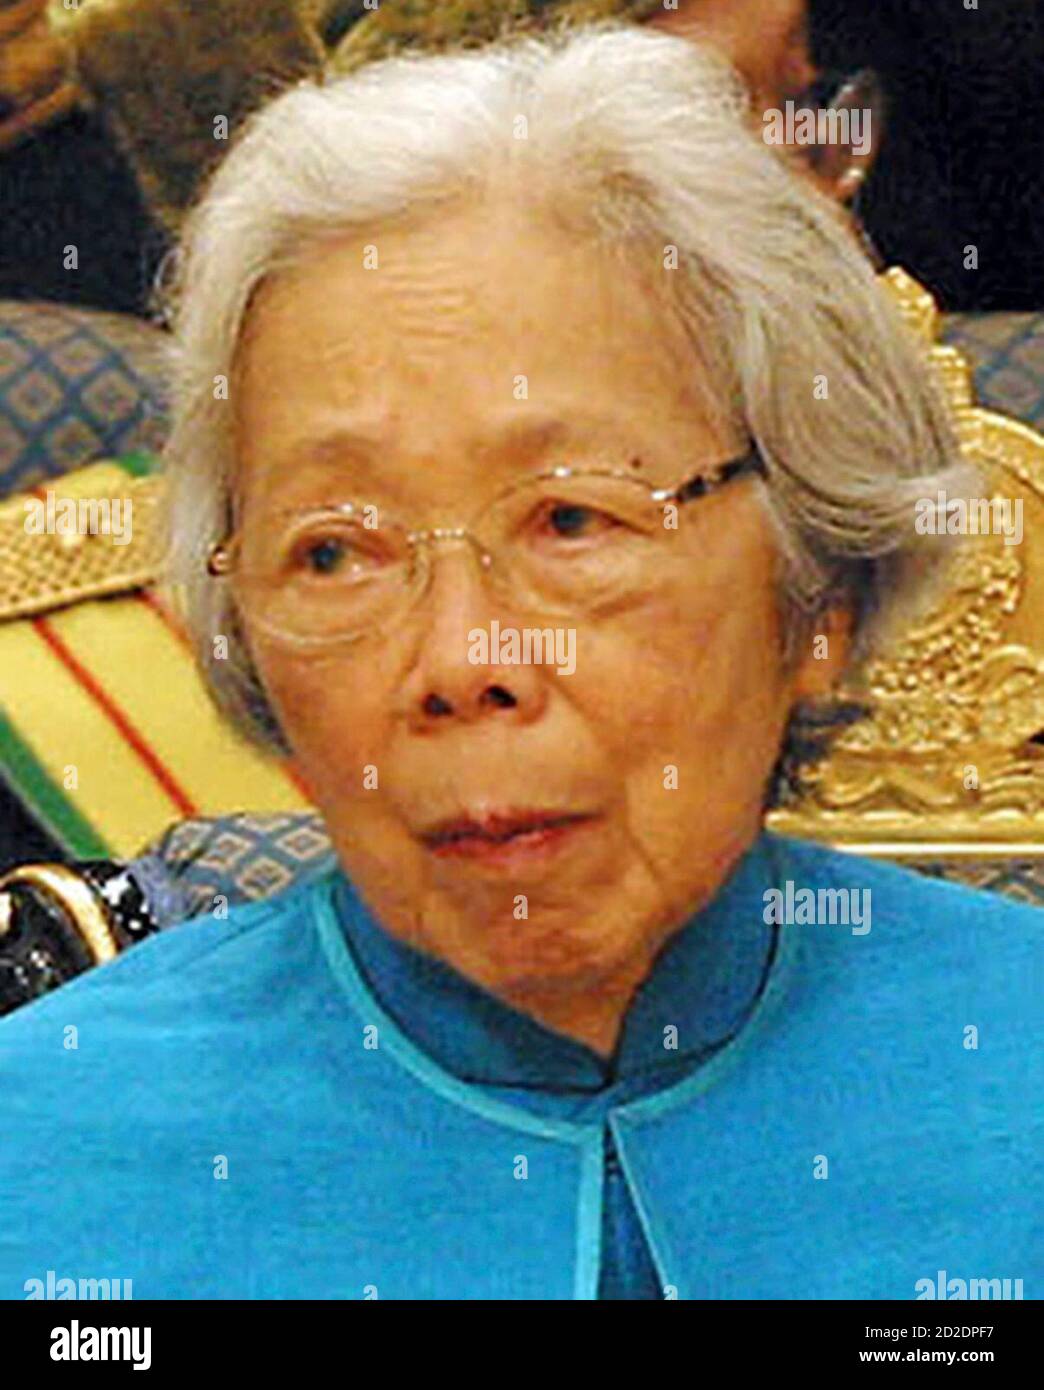 kwa-geok-choo-wife-of-singapores-first-prime-minister-lee-kuan-yew-attends-a-ceremony-in-bandar-seri-begawan-in-this-september-9-2004-file-photo-kwa-has-been-admitted-to-hospital-after-suffering-from-a-brain-haemorrhage-and-she-remains-in-a-serious-condition-media-reported-on-may-15-2008-reutersandy-wongpoolfiles-brunei-2D2DPF7.jpg